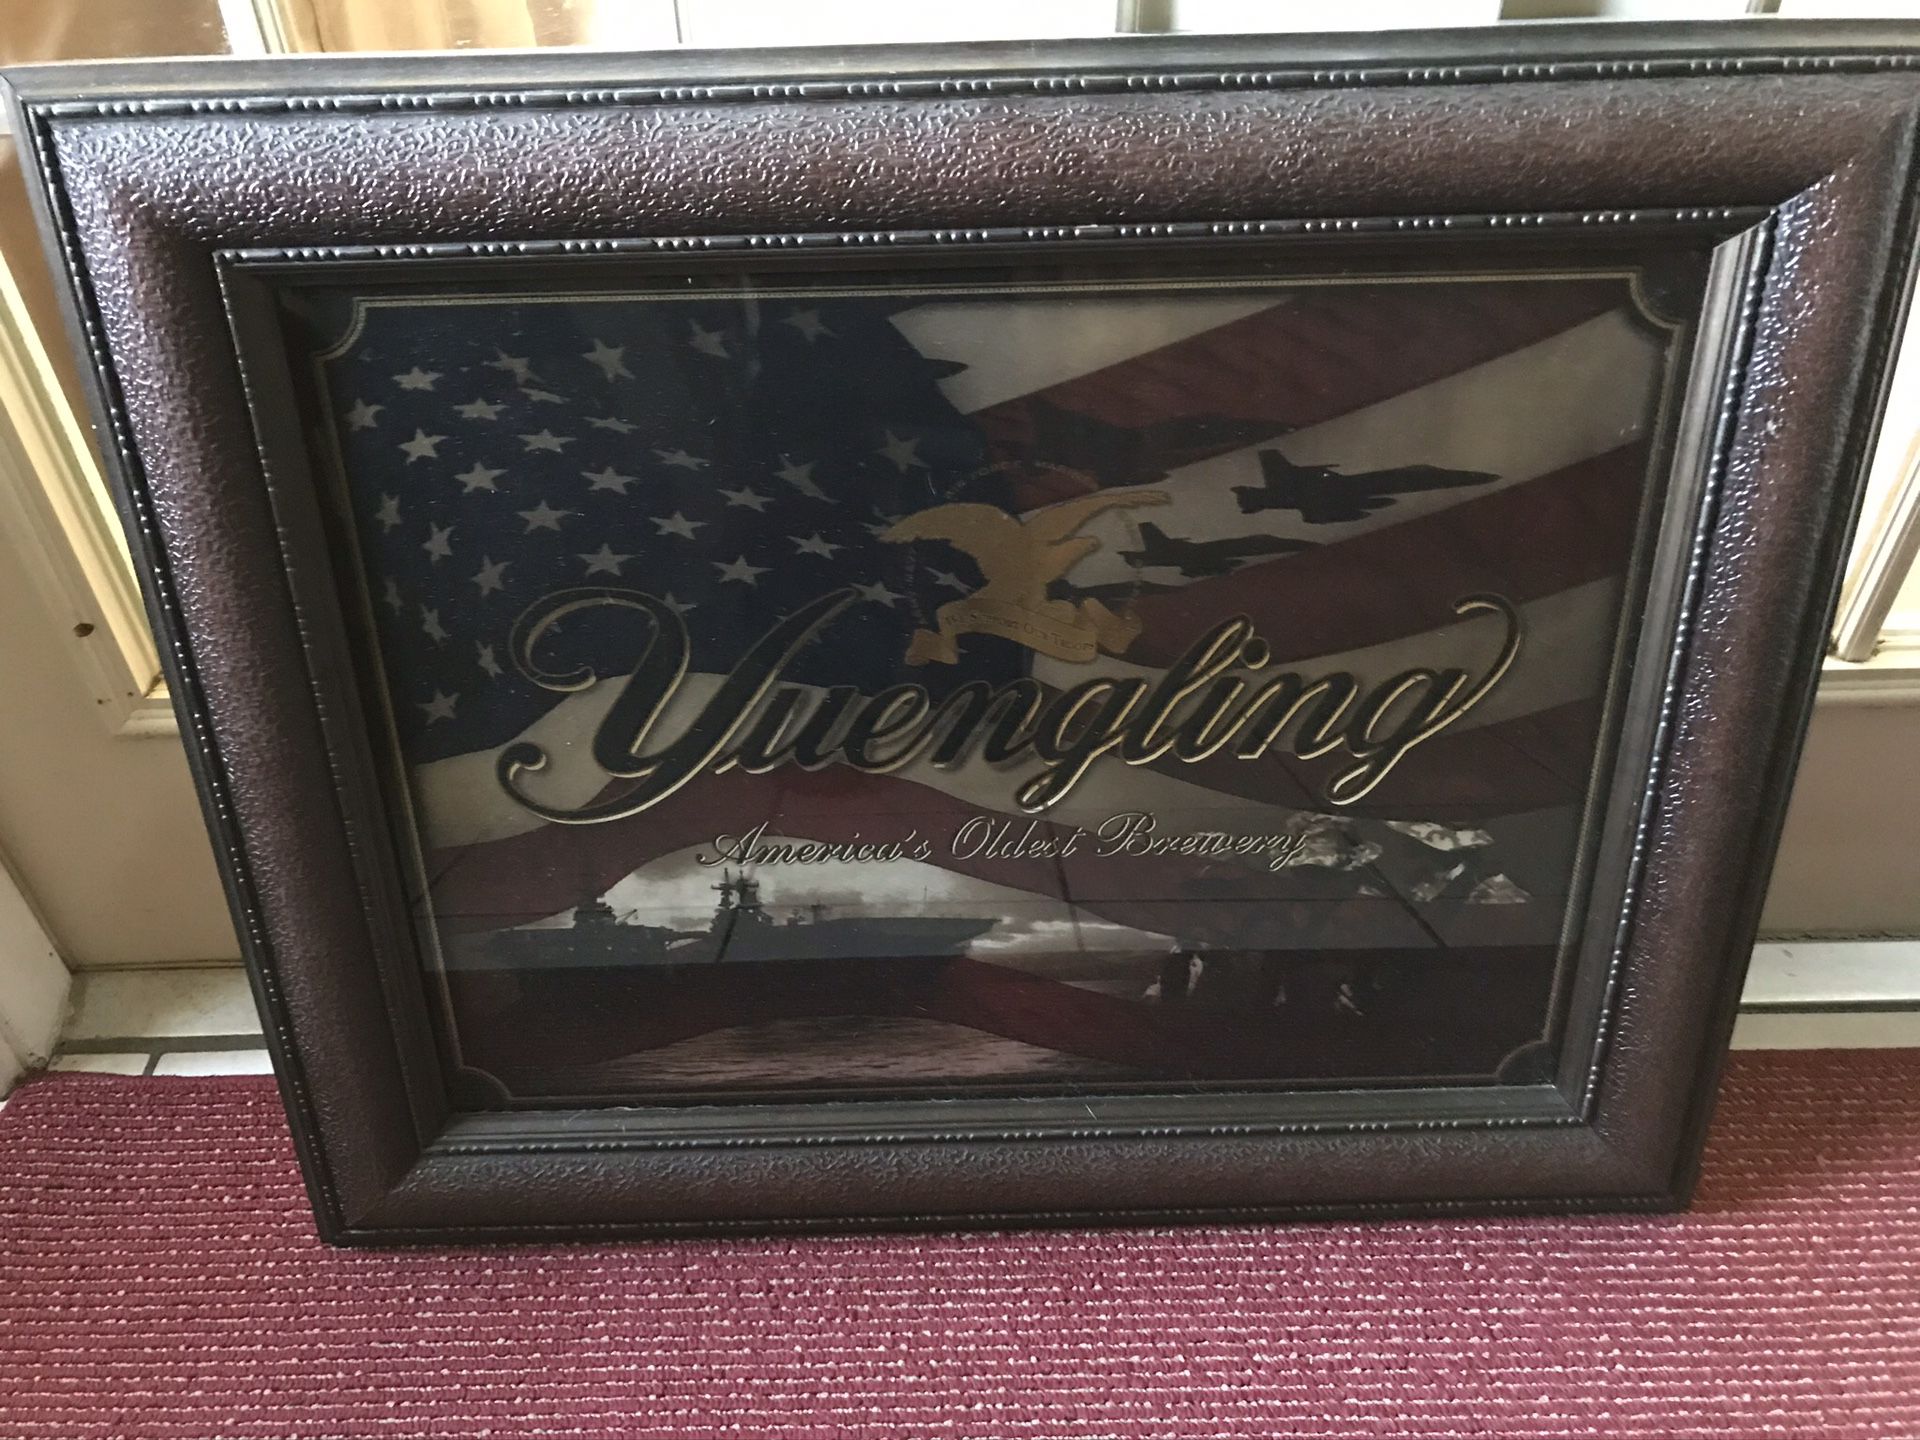 RARE YUENGLING BREWERY FRAME SIGN